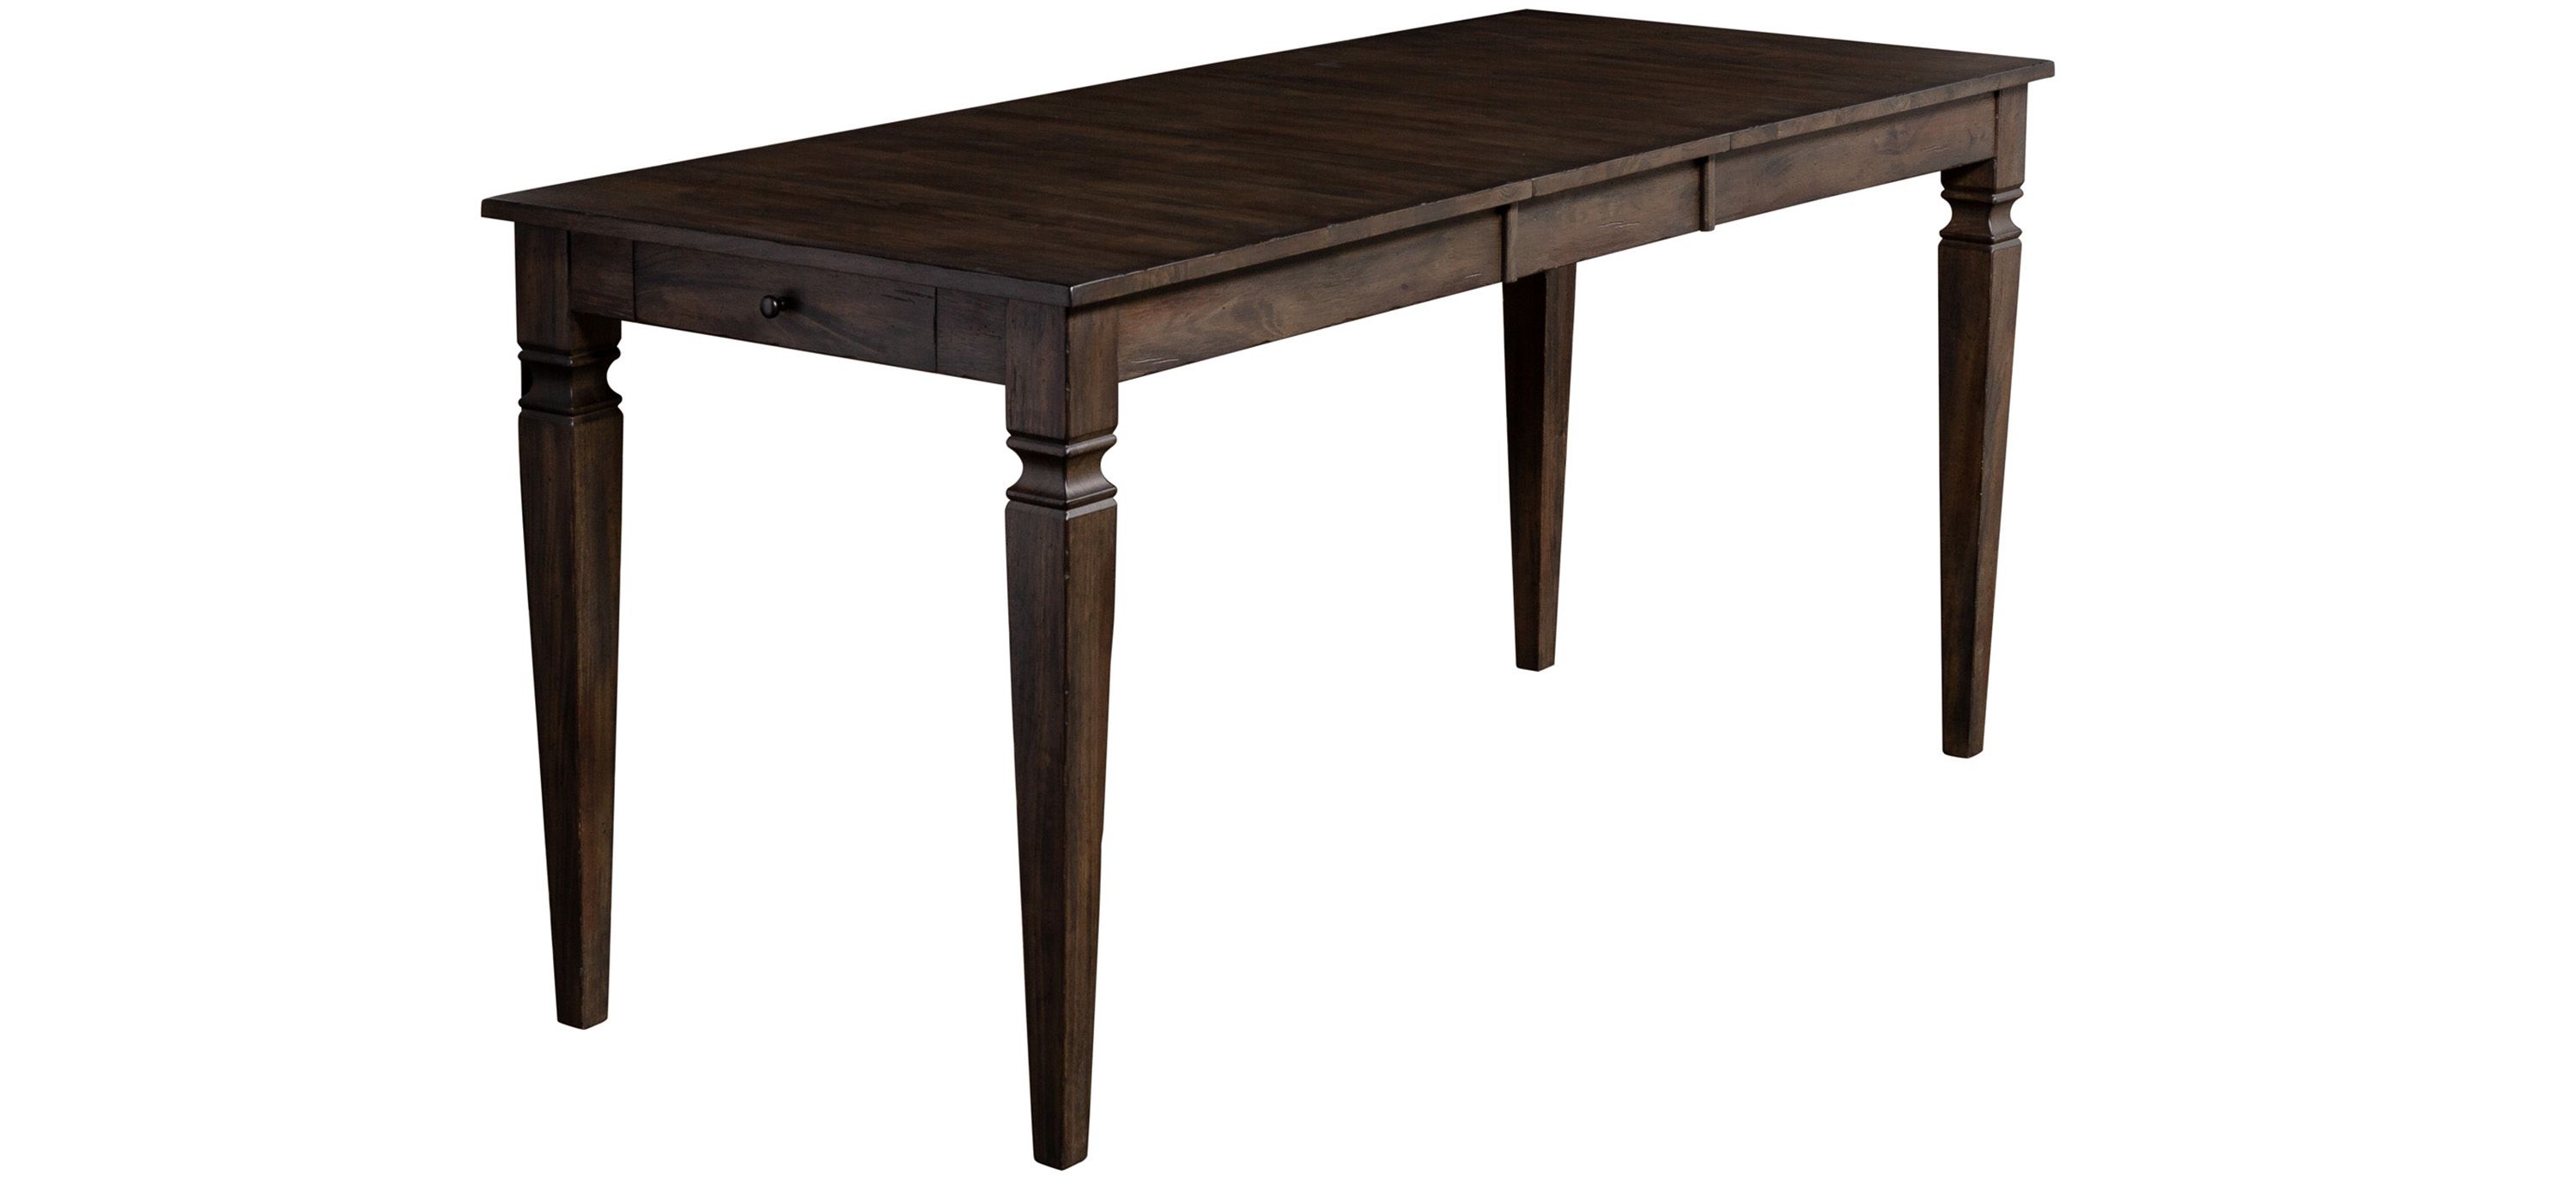 Kingston Rectangular Counter-Height Table with Butterfly Leaf